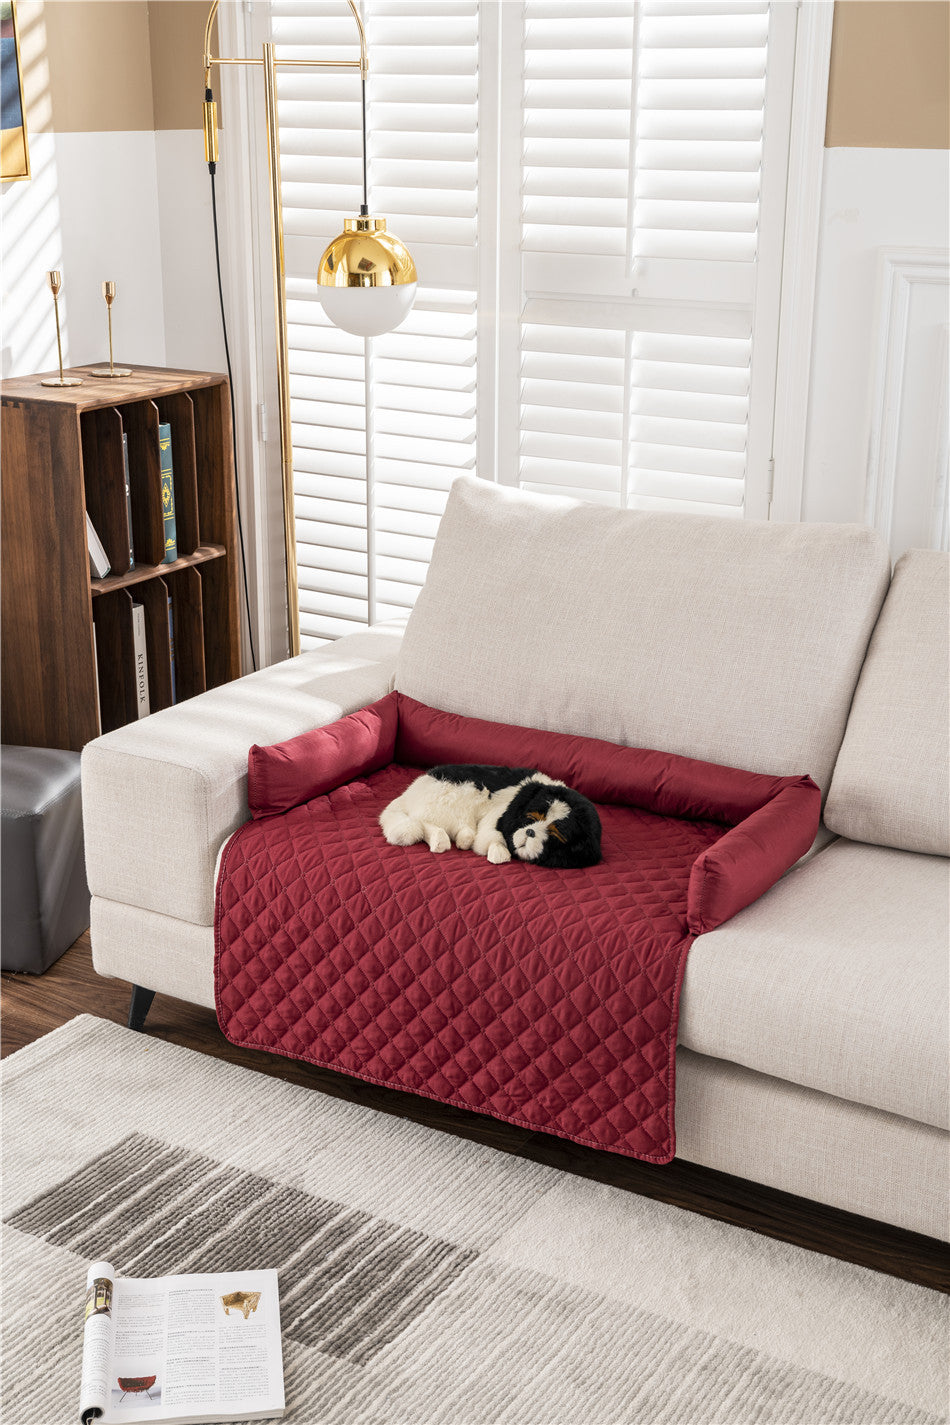 dog sleeping on red bolster mat on couch